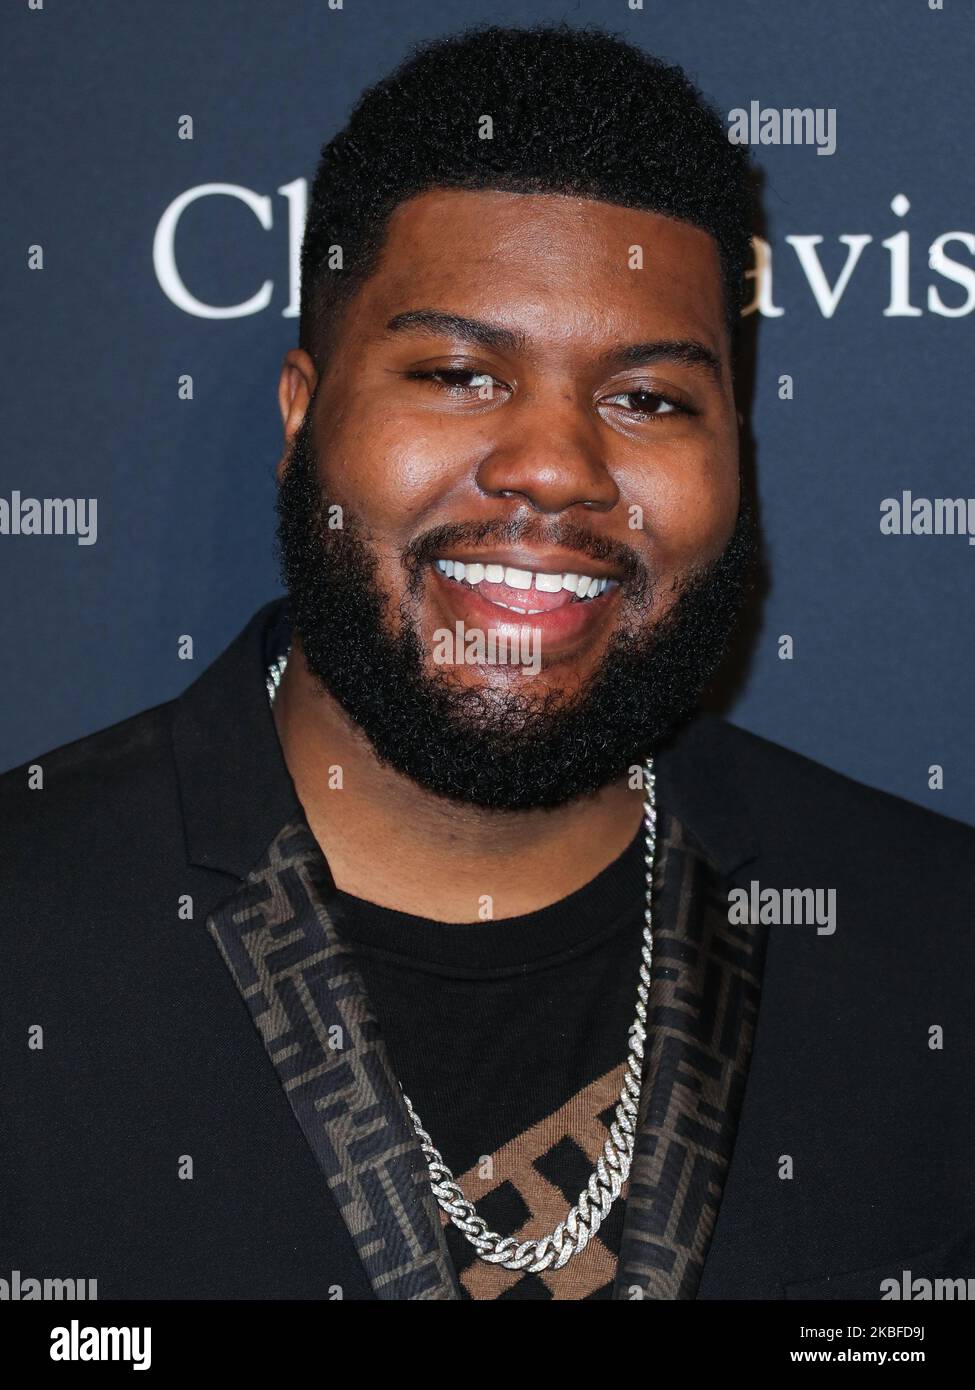 BEVERLY HILLS, LOS ANGELES, CALIFORNIA, USA - JANUARY 25: Khalid arrives at The Recording Academy And Clive Davis' 2020 Pre-GRAMMY Gala held at The Beverly Hilton Hotel on January 25, 2020 in Beverly Hills, Los Angeles, California, United States. (Photo by Xavier Collin/Image Press Agency/NurPhoto) Stock Photo